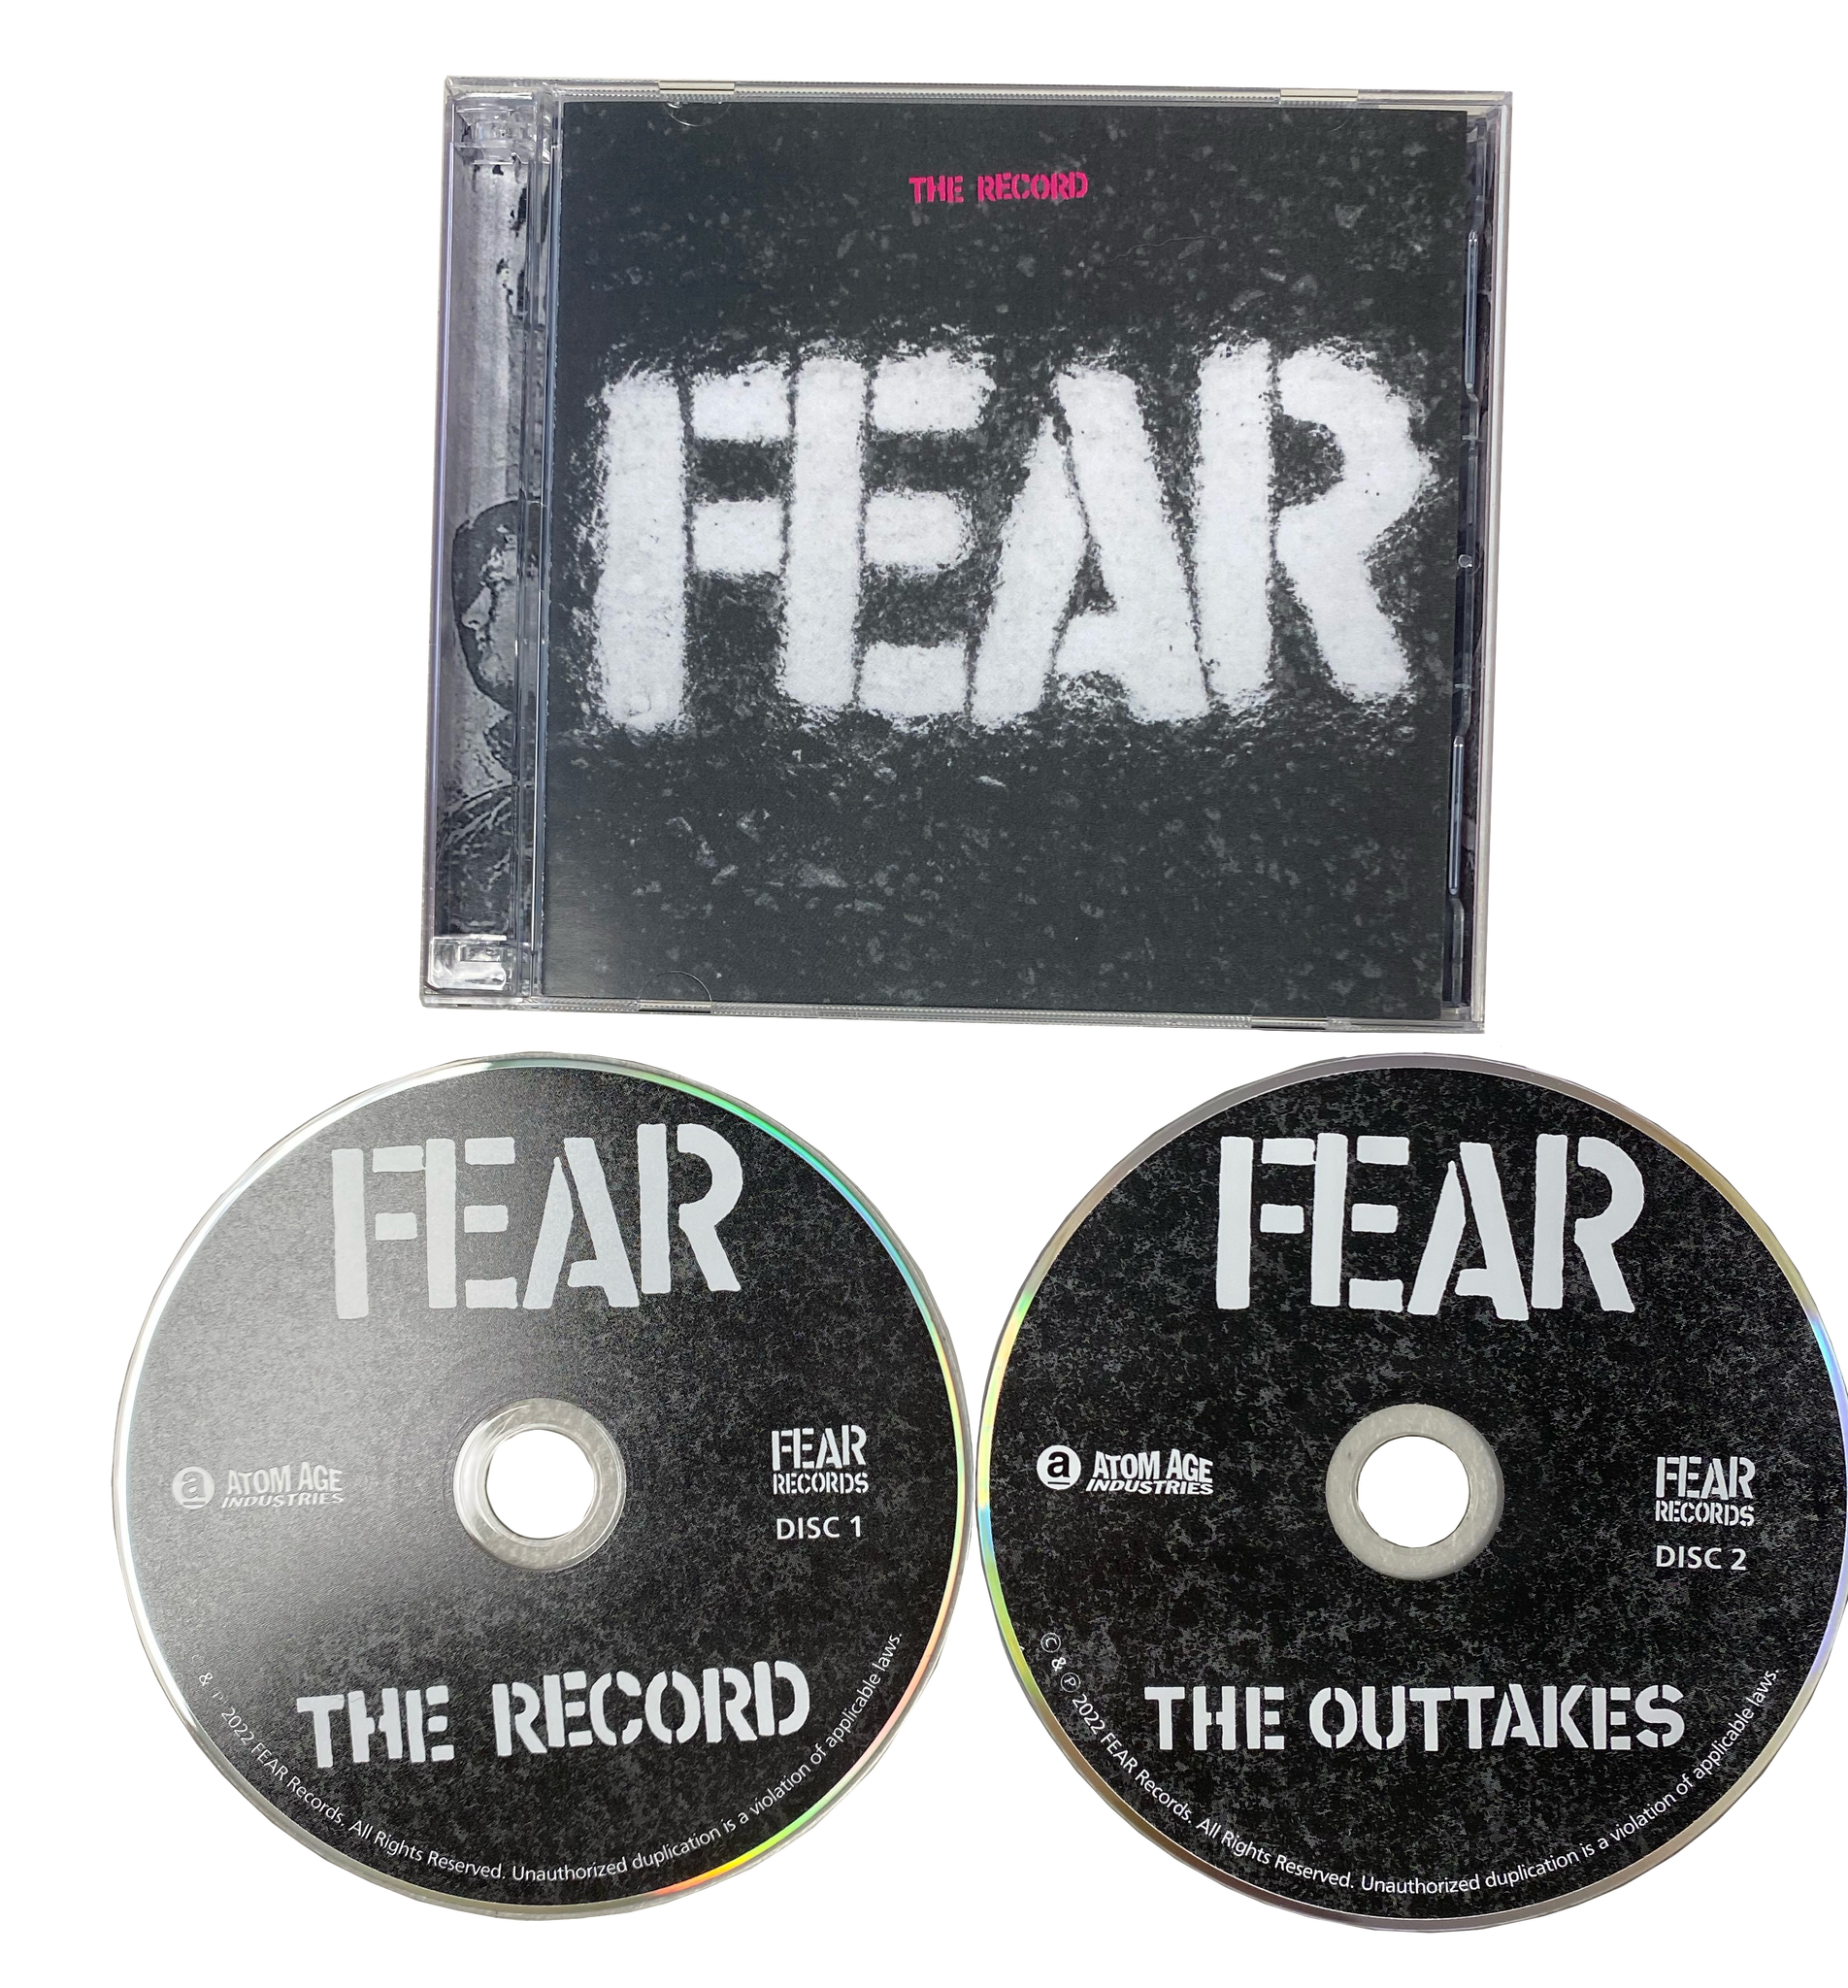 FEAR:  "FEAR THE RECORD" RE-ISSUE 2CD SET